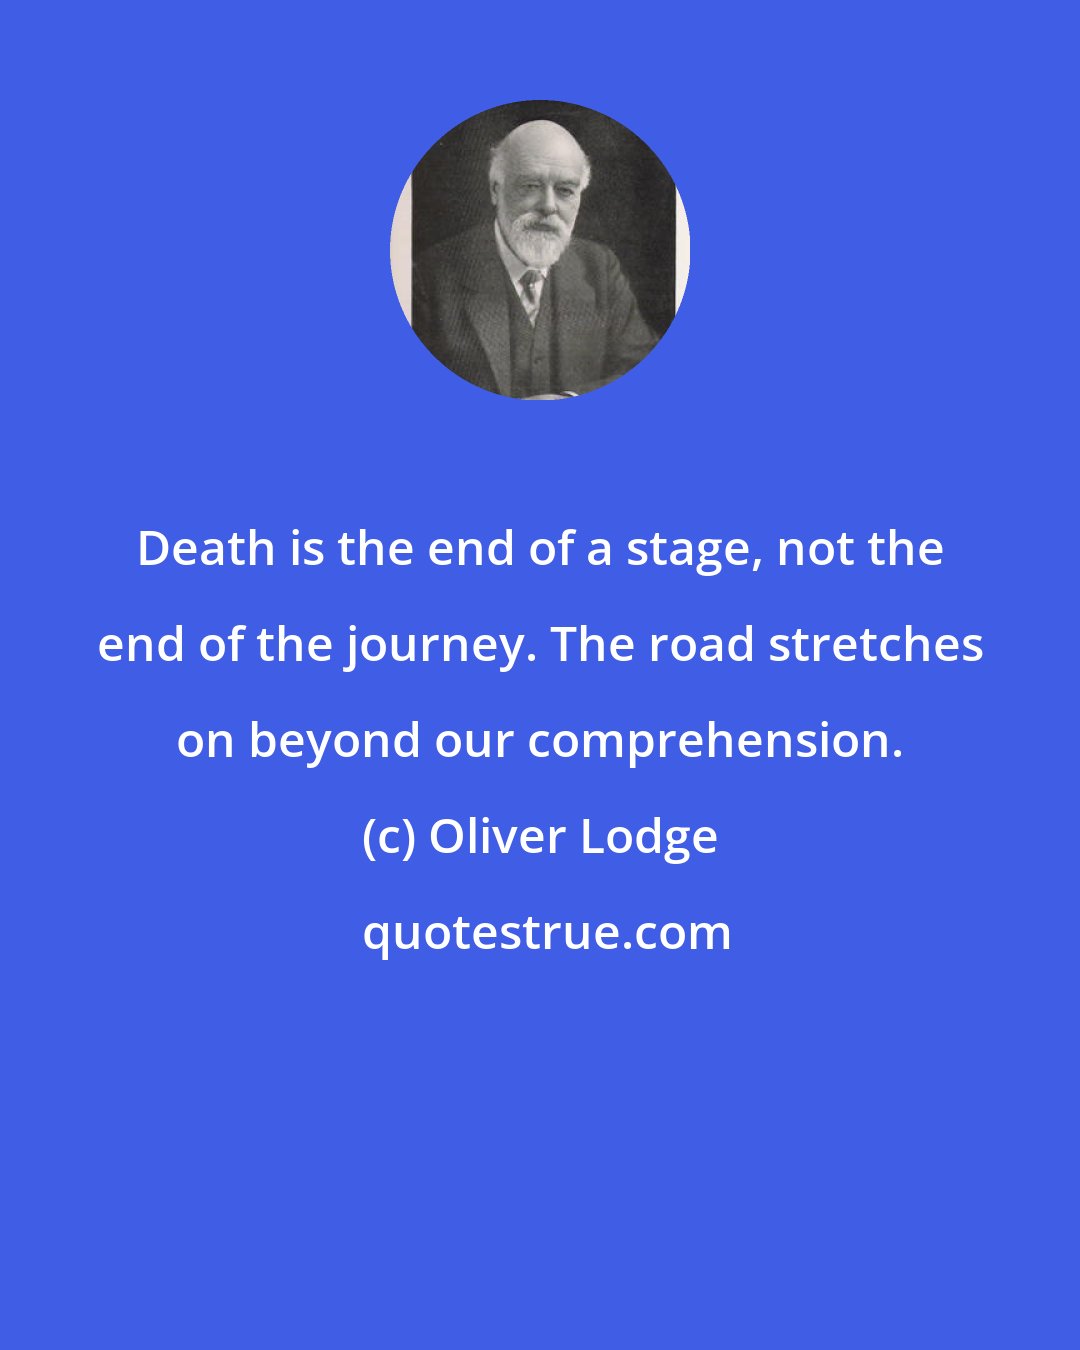 Oliver Lodge: Death is the end of a stage, not the end of the journey. The road stretches on beyond our comprehension.